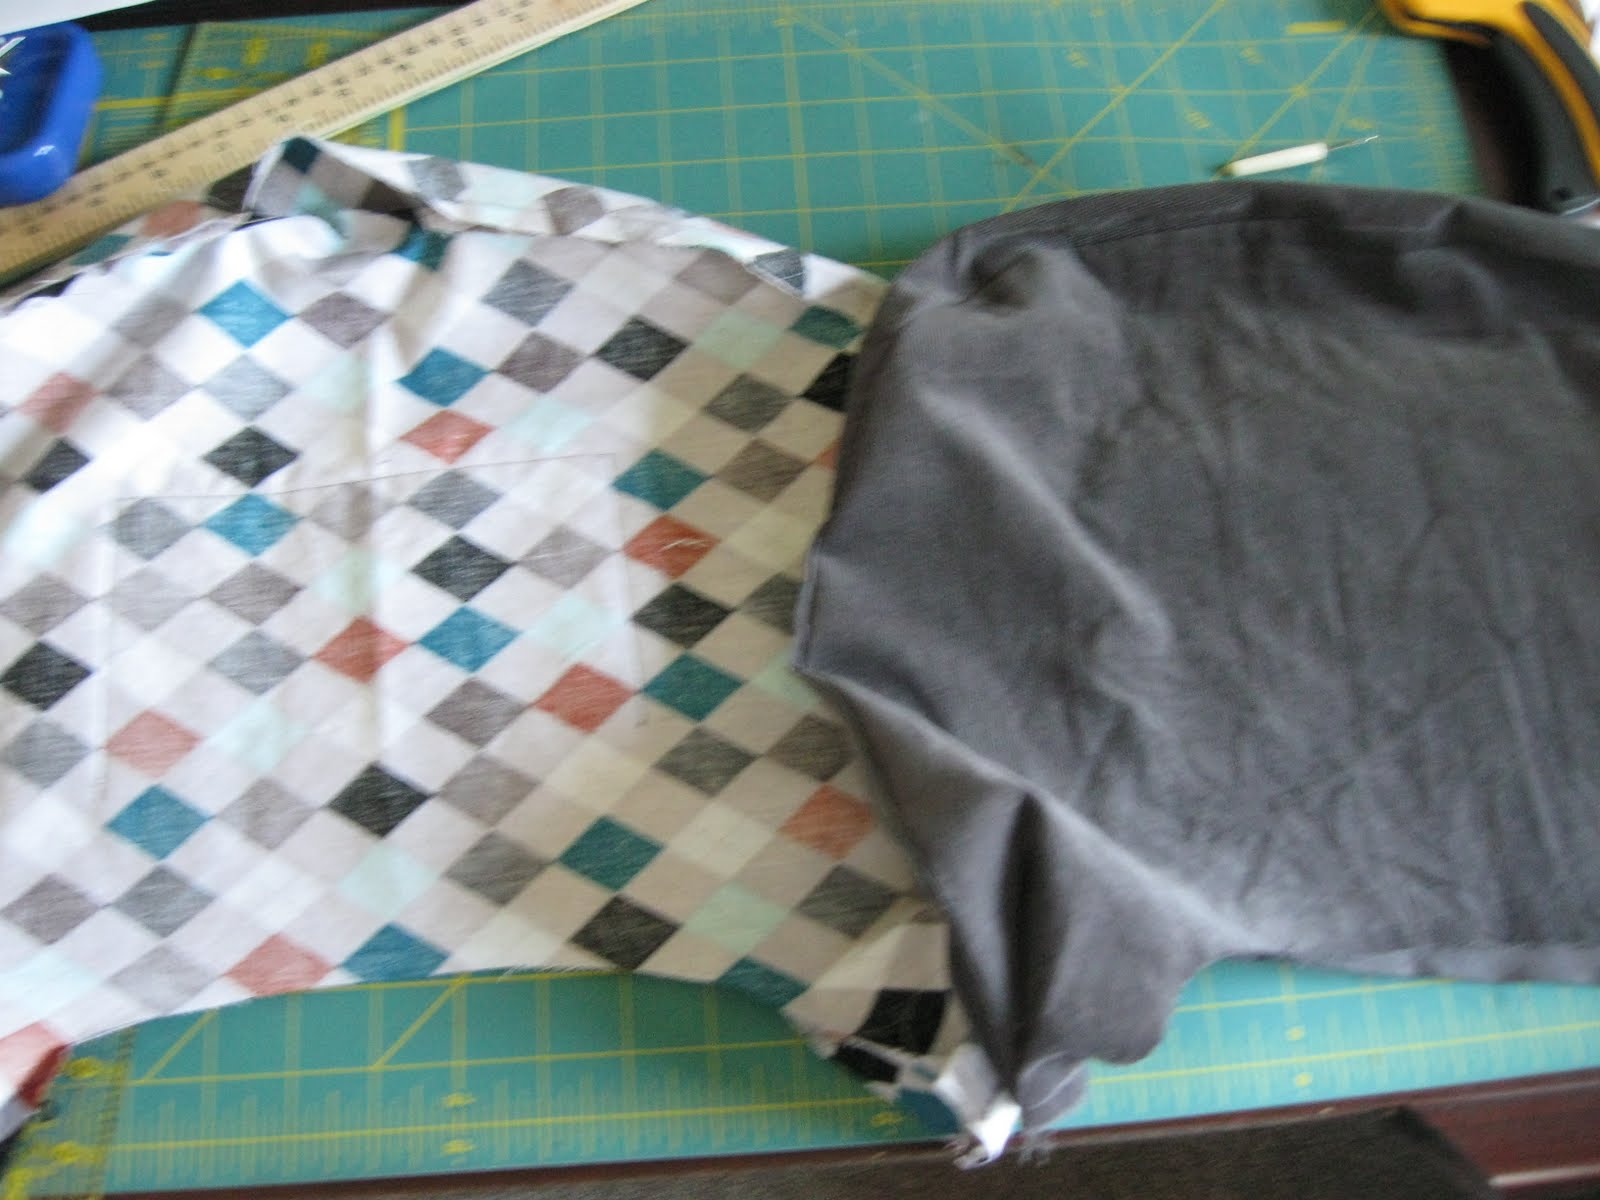 How To Make a Slouchy Hobo Bag – Sewing Tutorial with Free Pattern –  WhatTheCraft